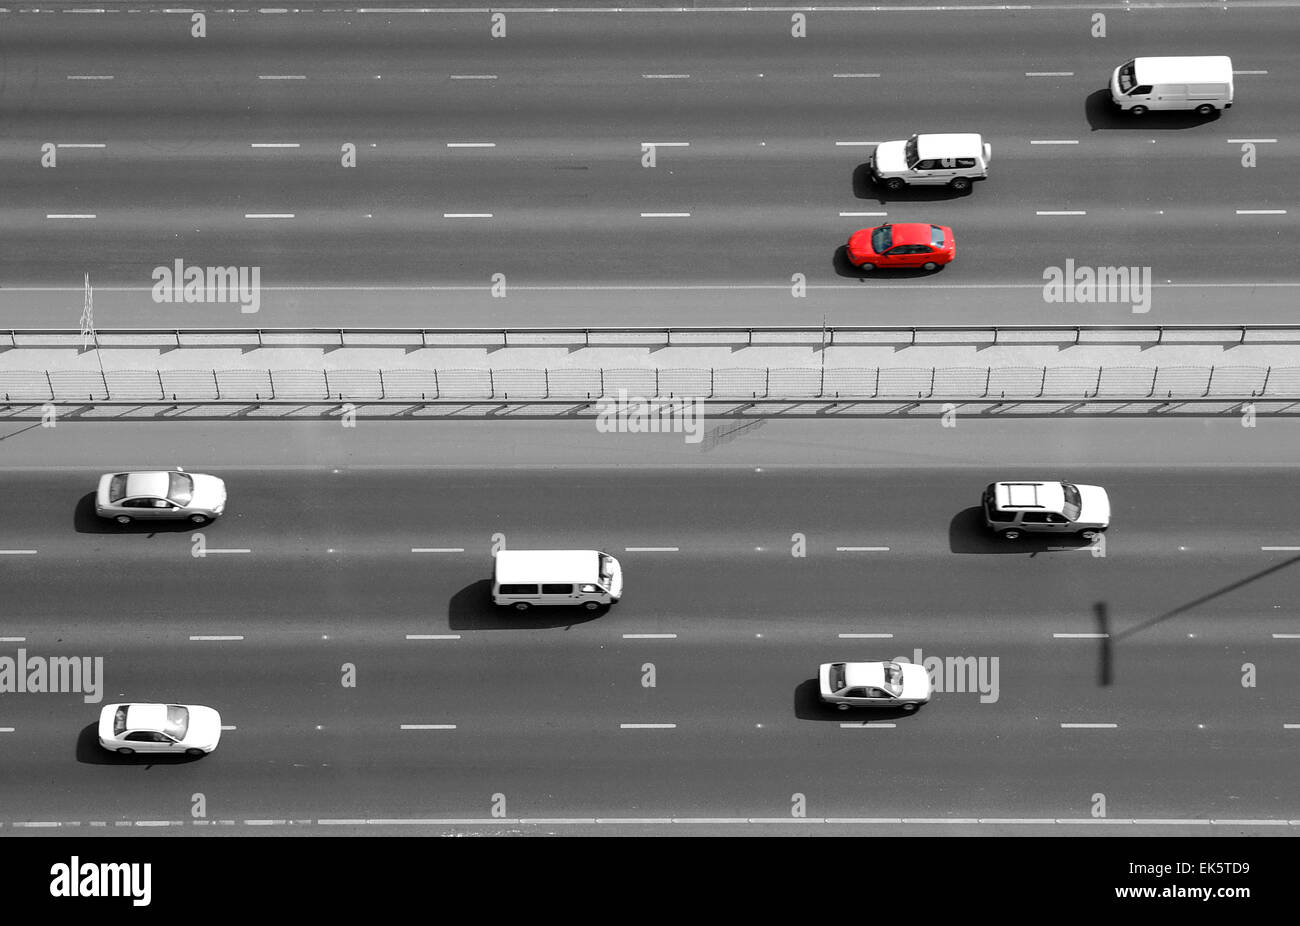 Overhead view of traffic on a highway in Dubai Stock Photo